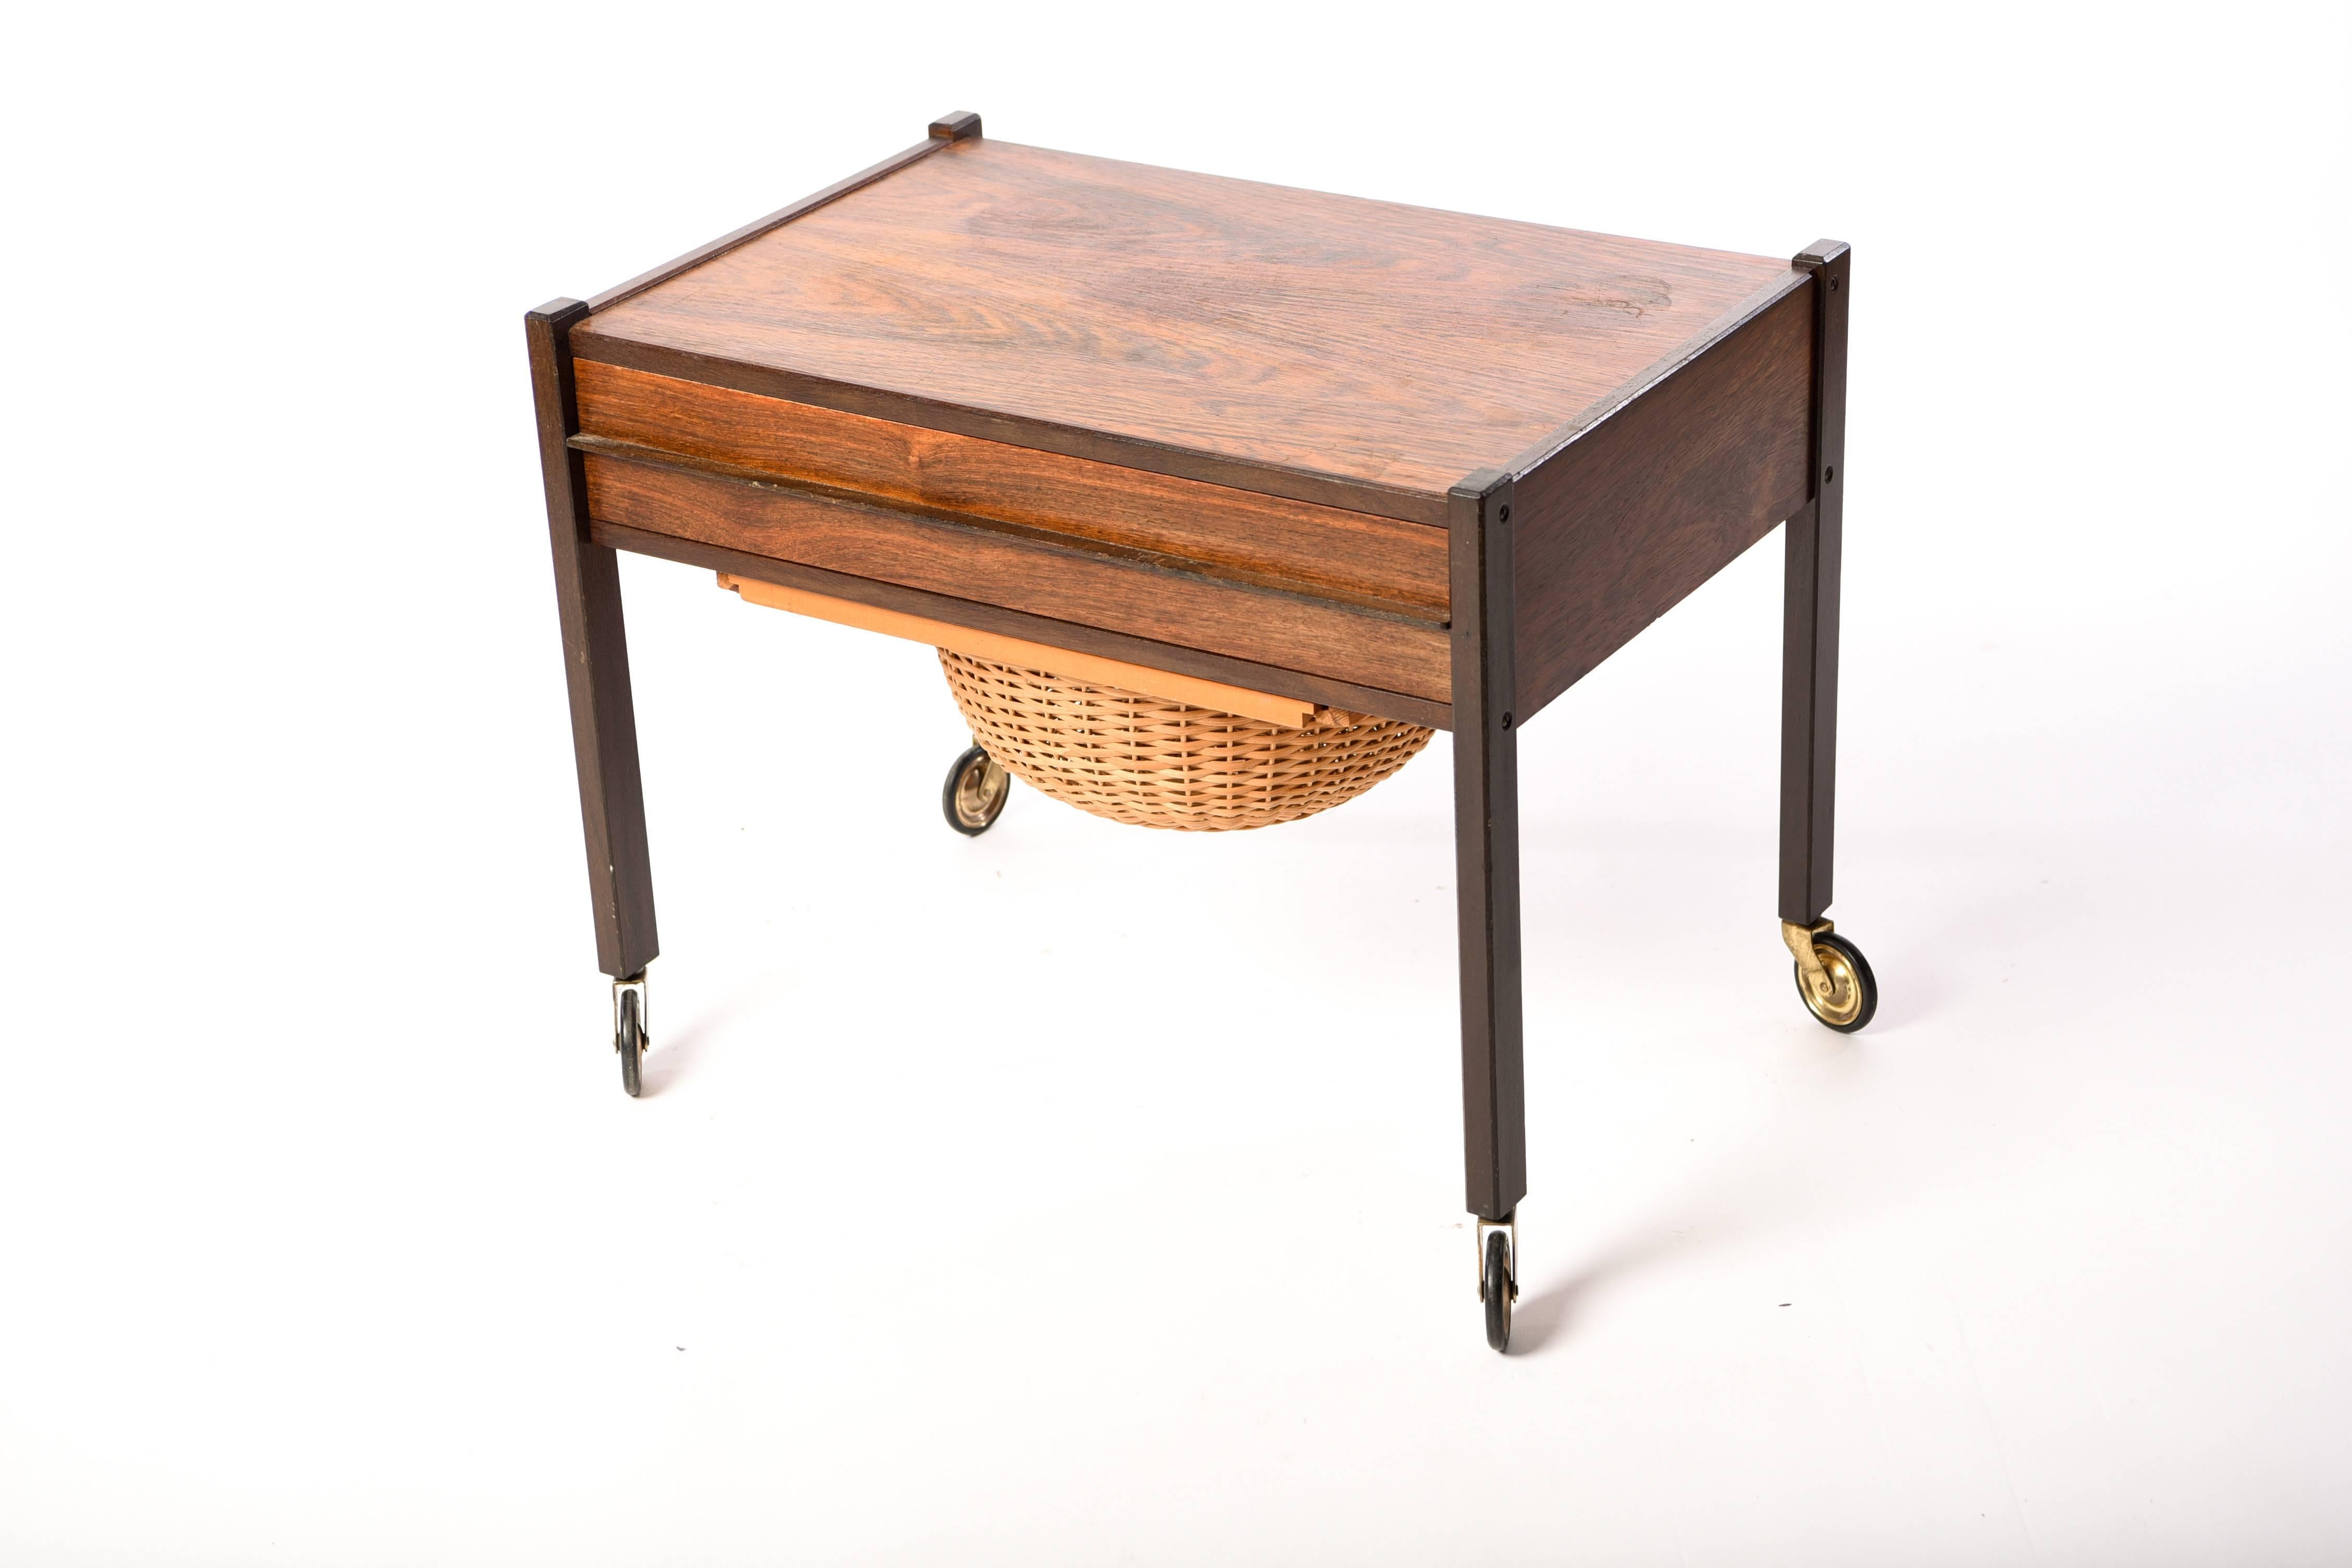 This Danish midcentury rosewood sewing table features wheels for easy mobility and a storage basket underneath.